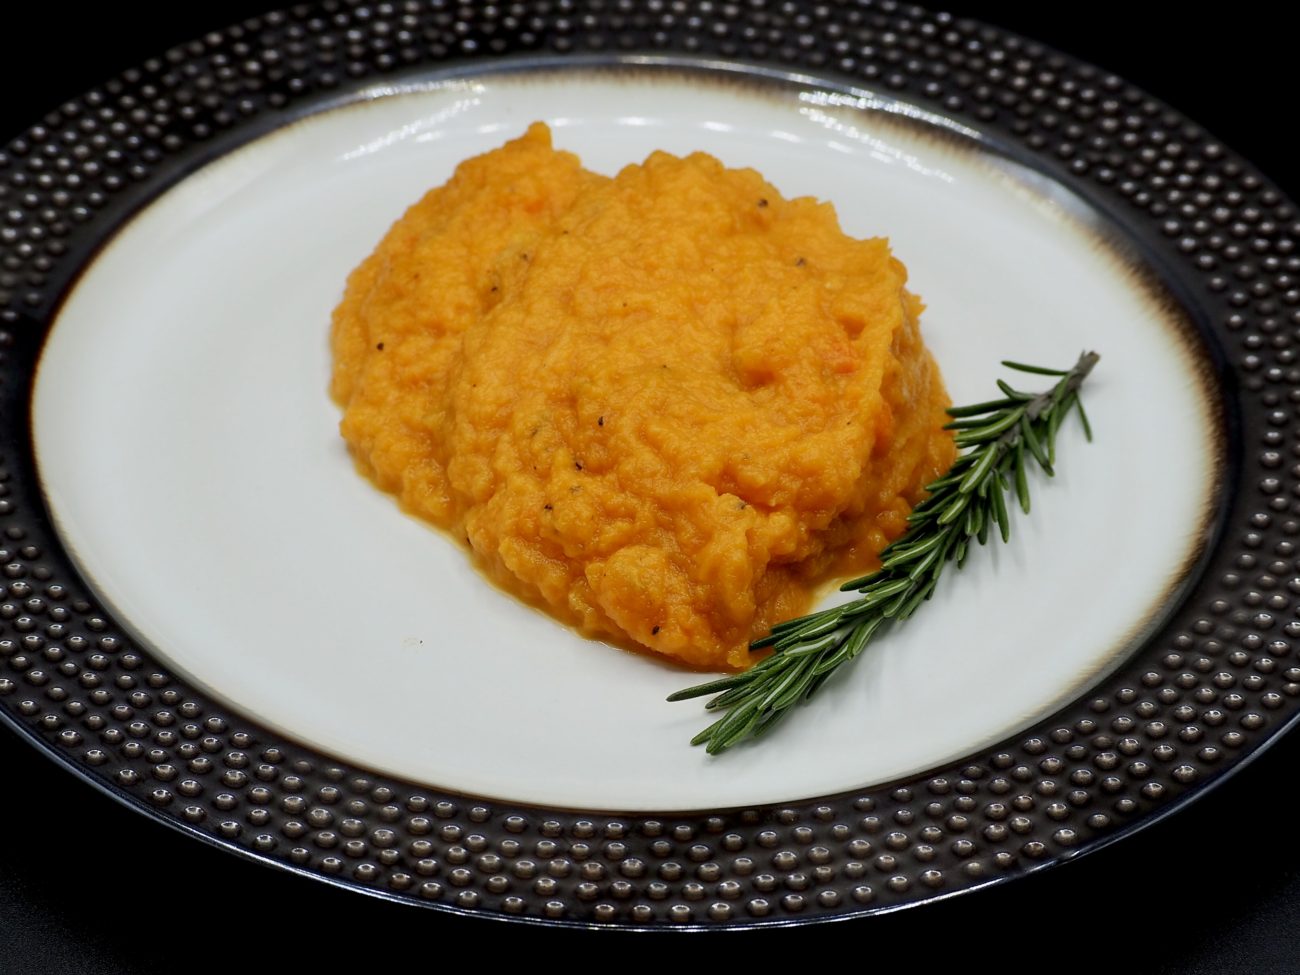 The Most Amazing Sweet Potato Purée with Rosemary